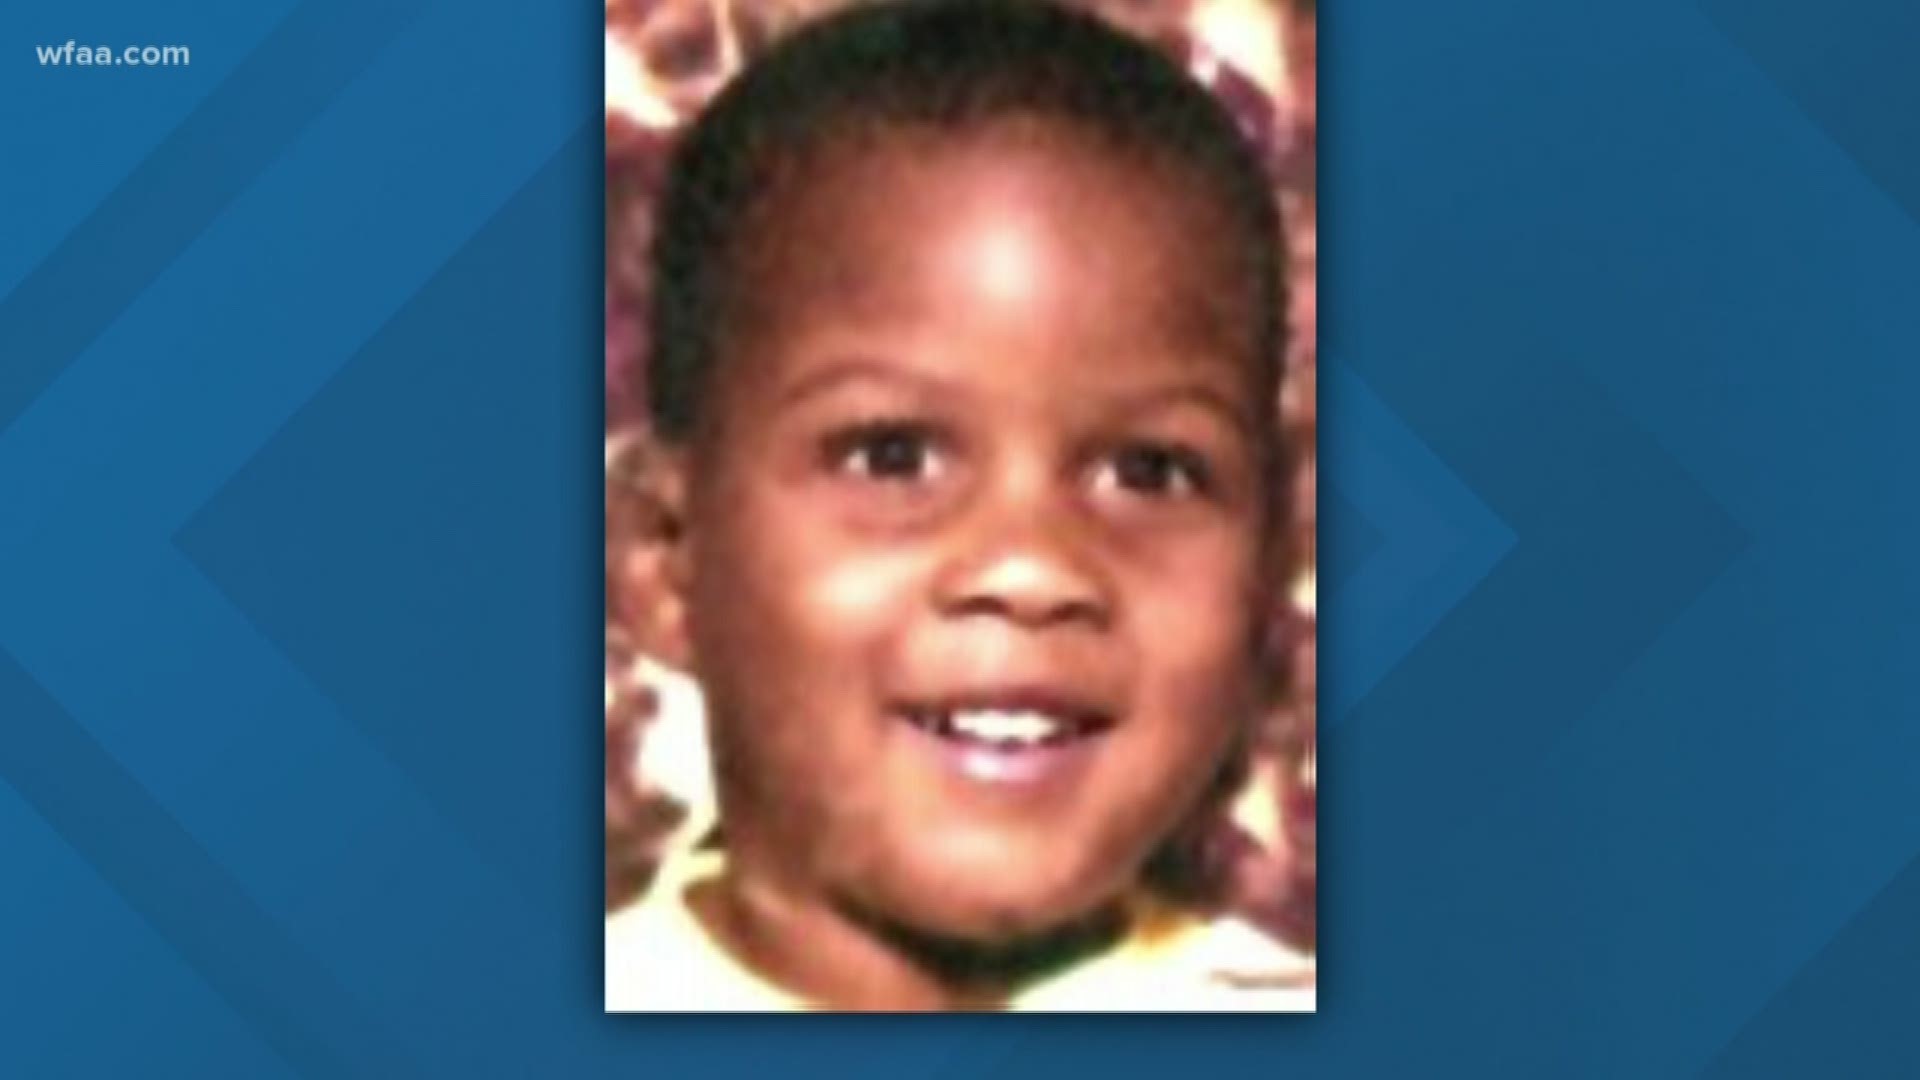 A North Texas man now faces a murder charge in the disappearance of his 5-year-old nephew.